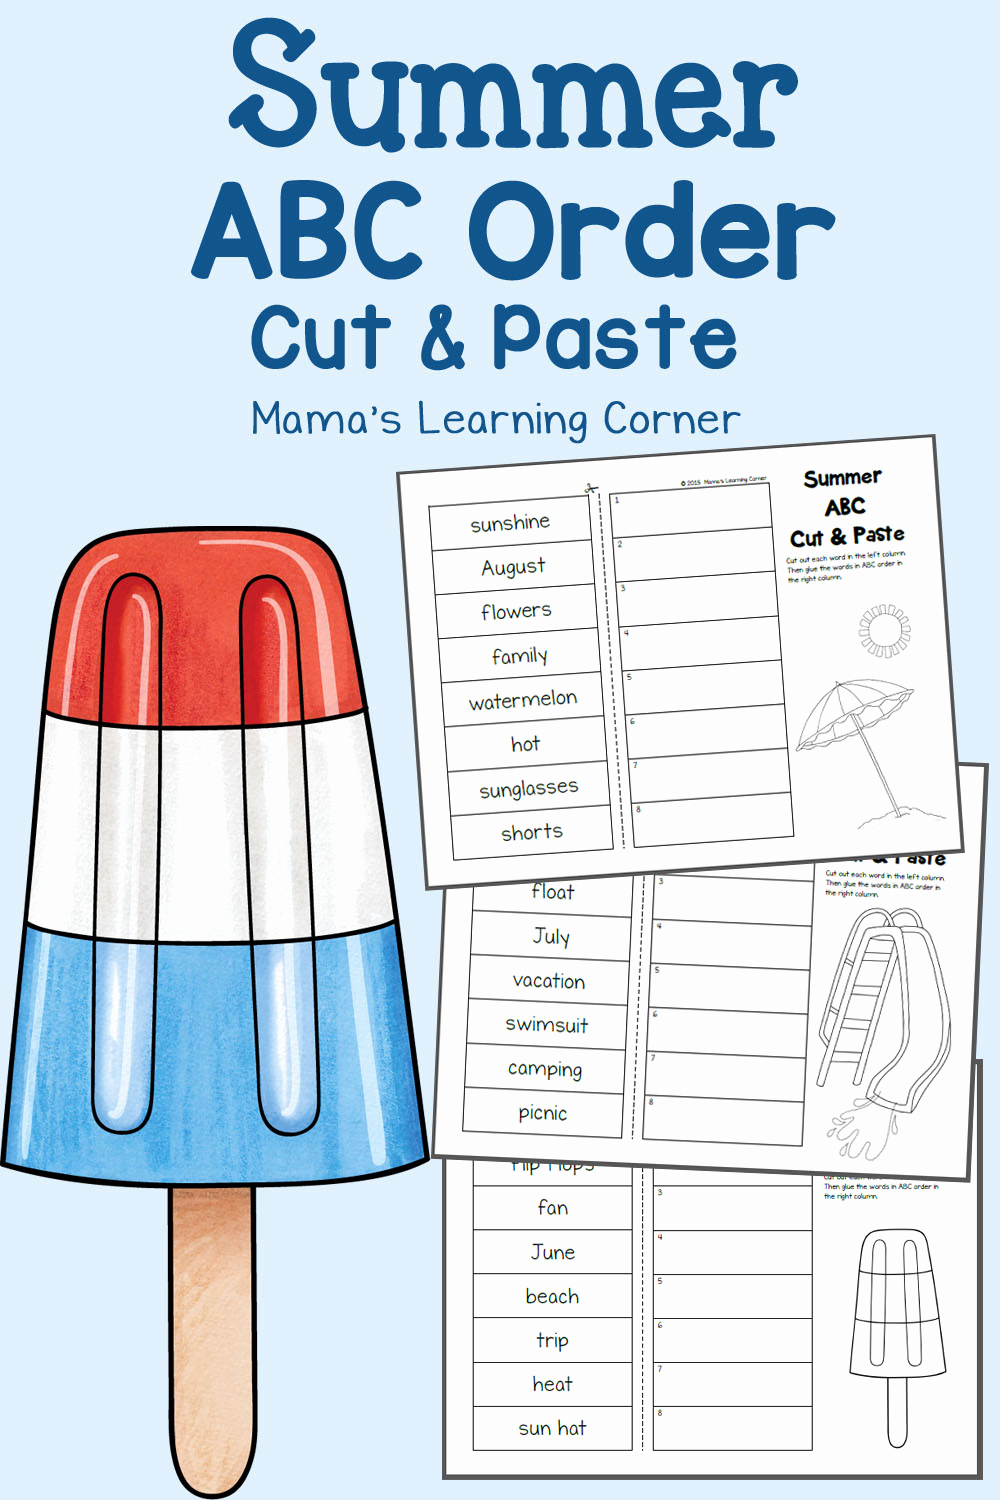 Cut and Paste Worksheets Free Best Of Summer Cut and Paste Abc order Worksheets Mamas